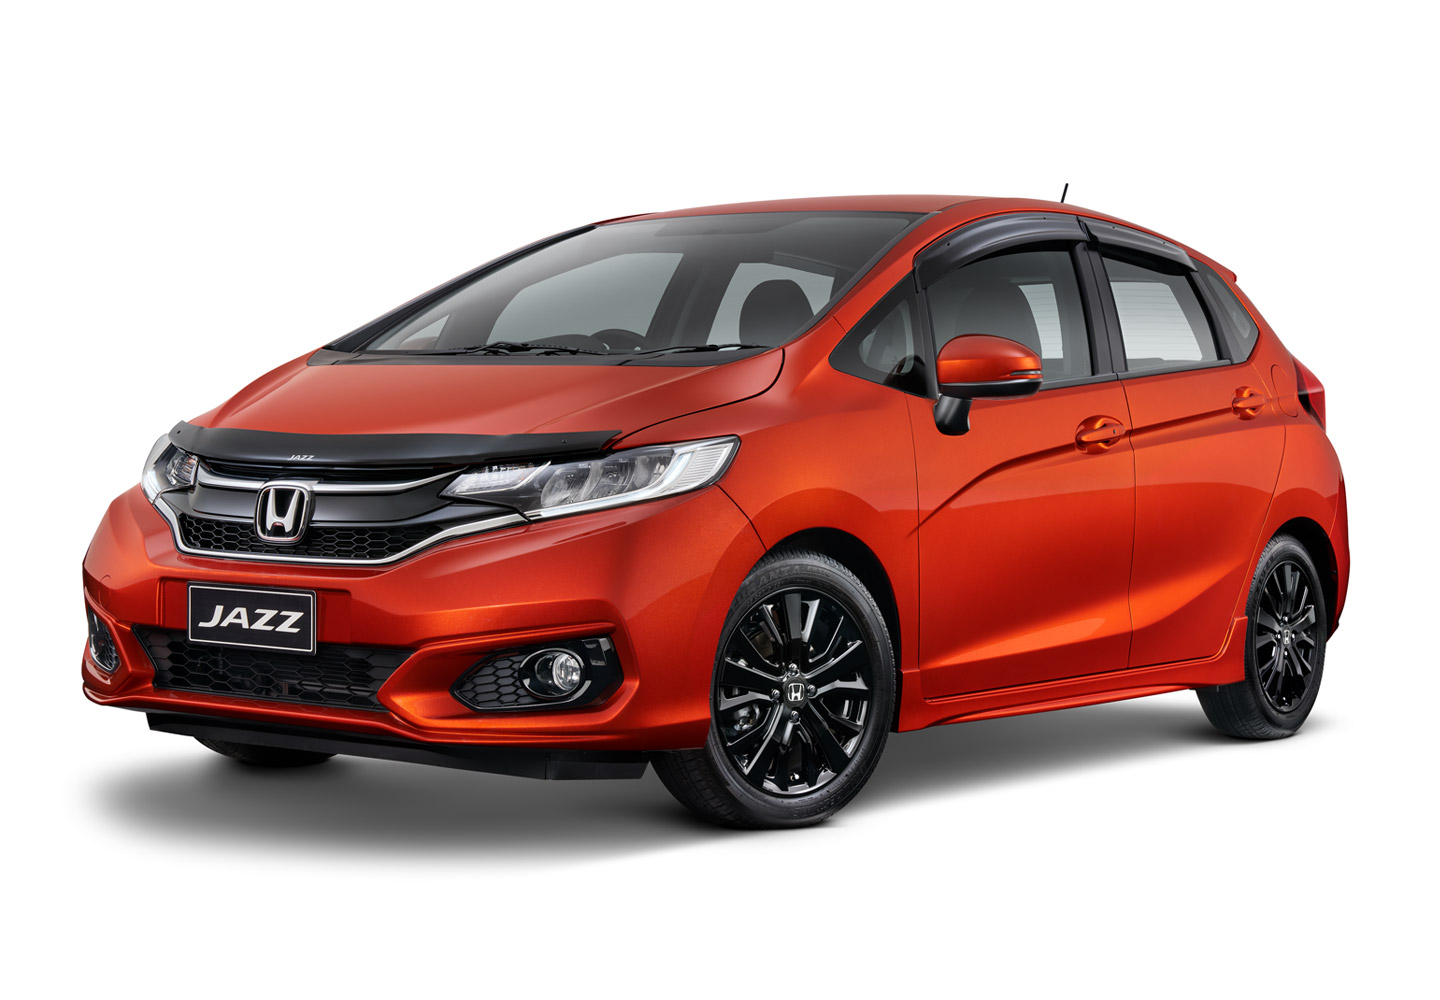 Refreshed 2017 Honda Jazz brings sportier look and more